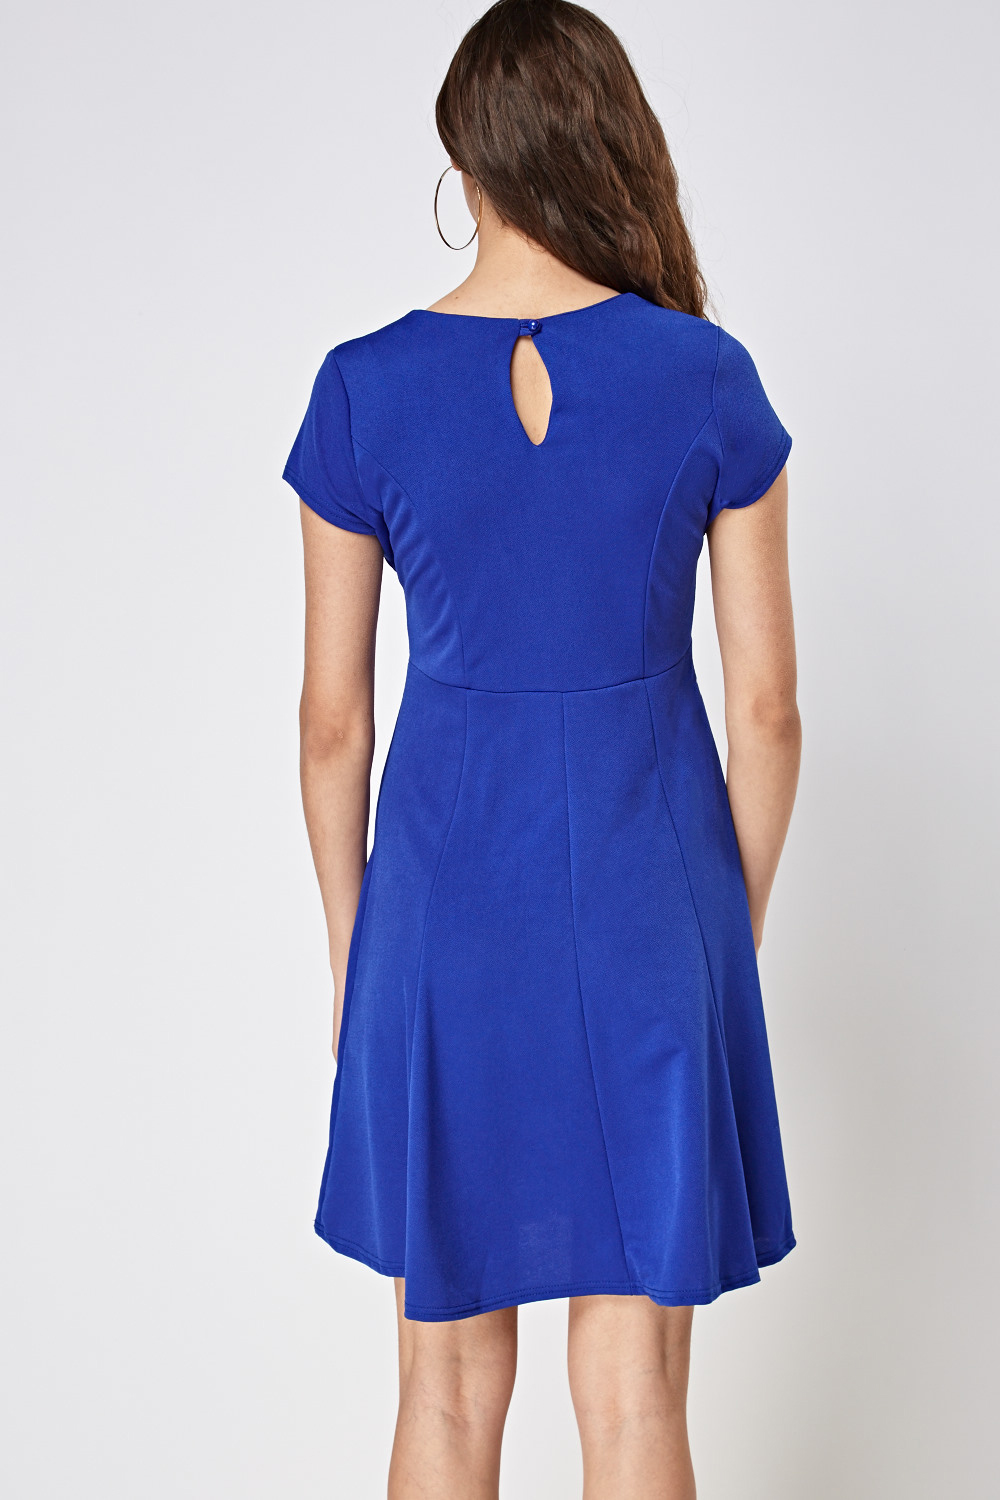 Royal Blue Textured Swing Dress - Just $7